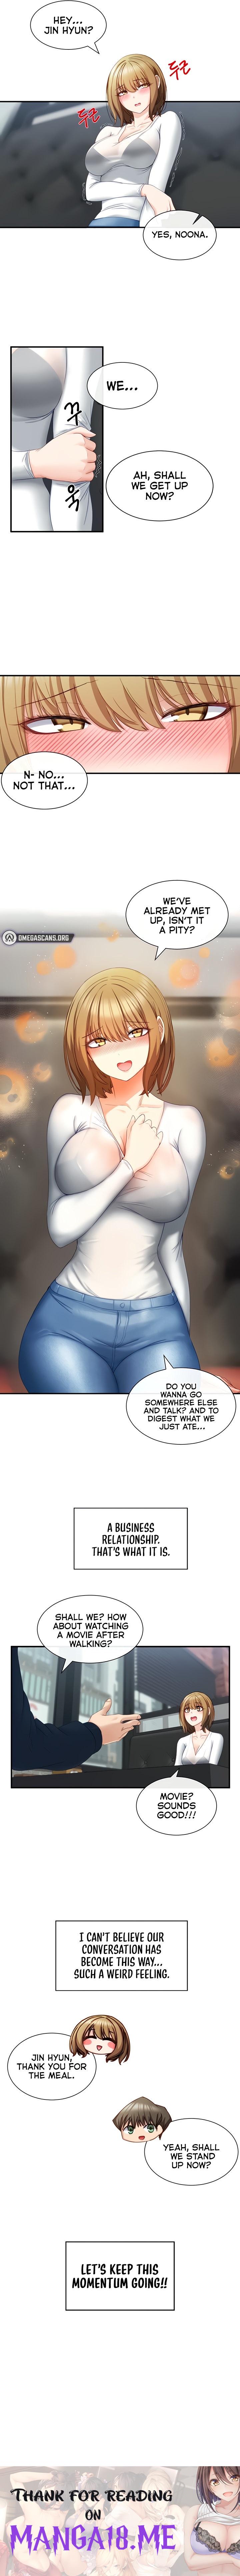 Heroine App - Chapter 2 Page 10